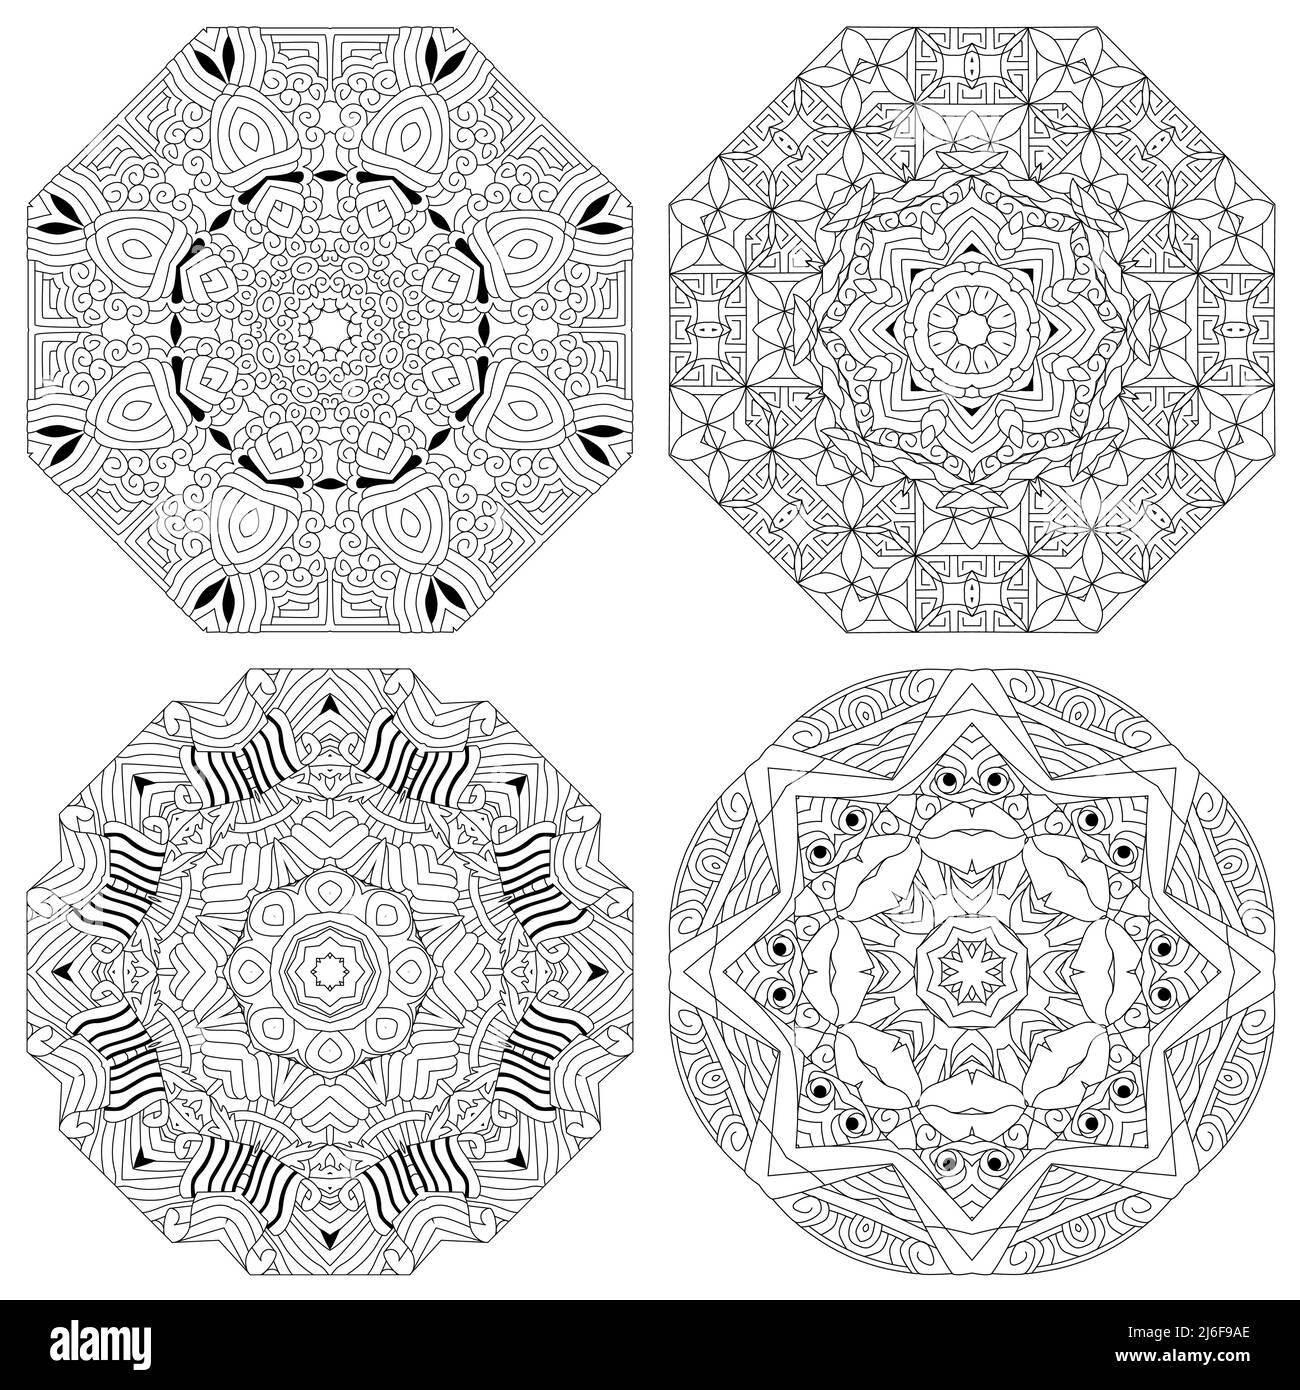 free anti coloring book pages